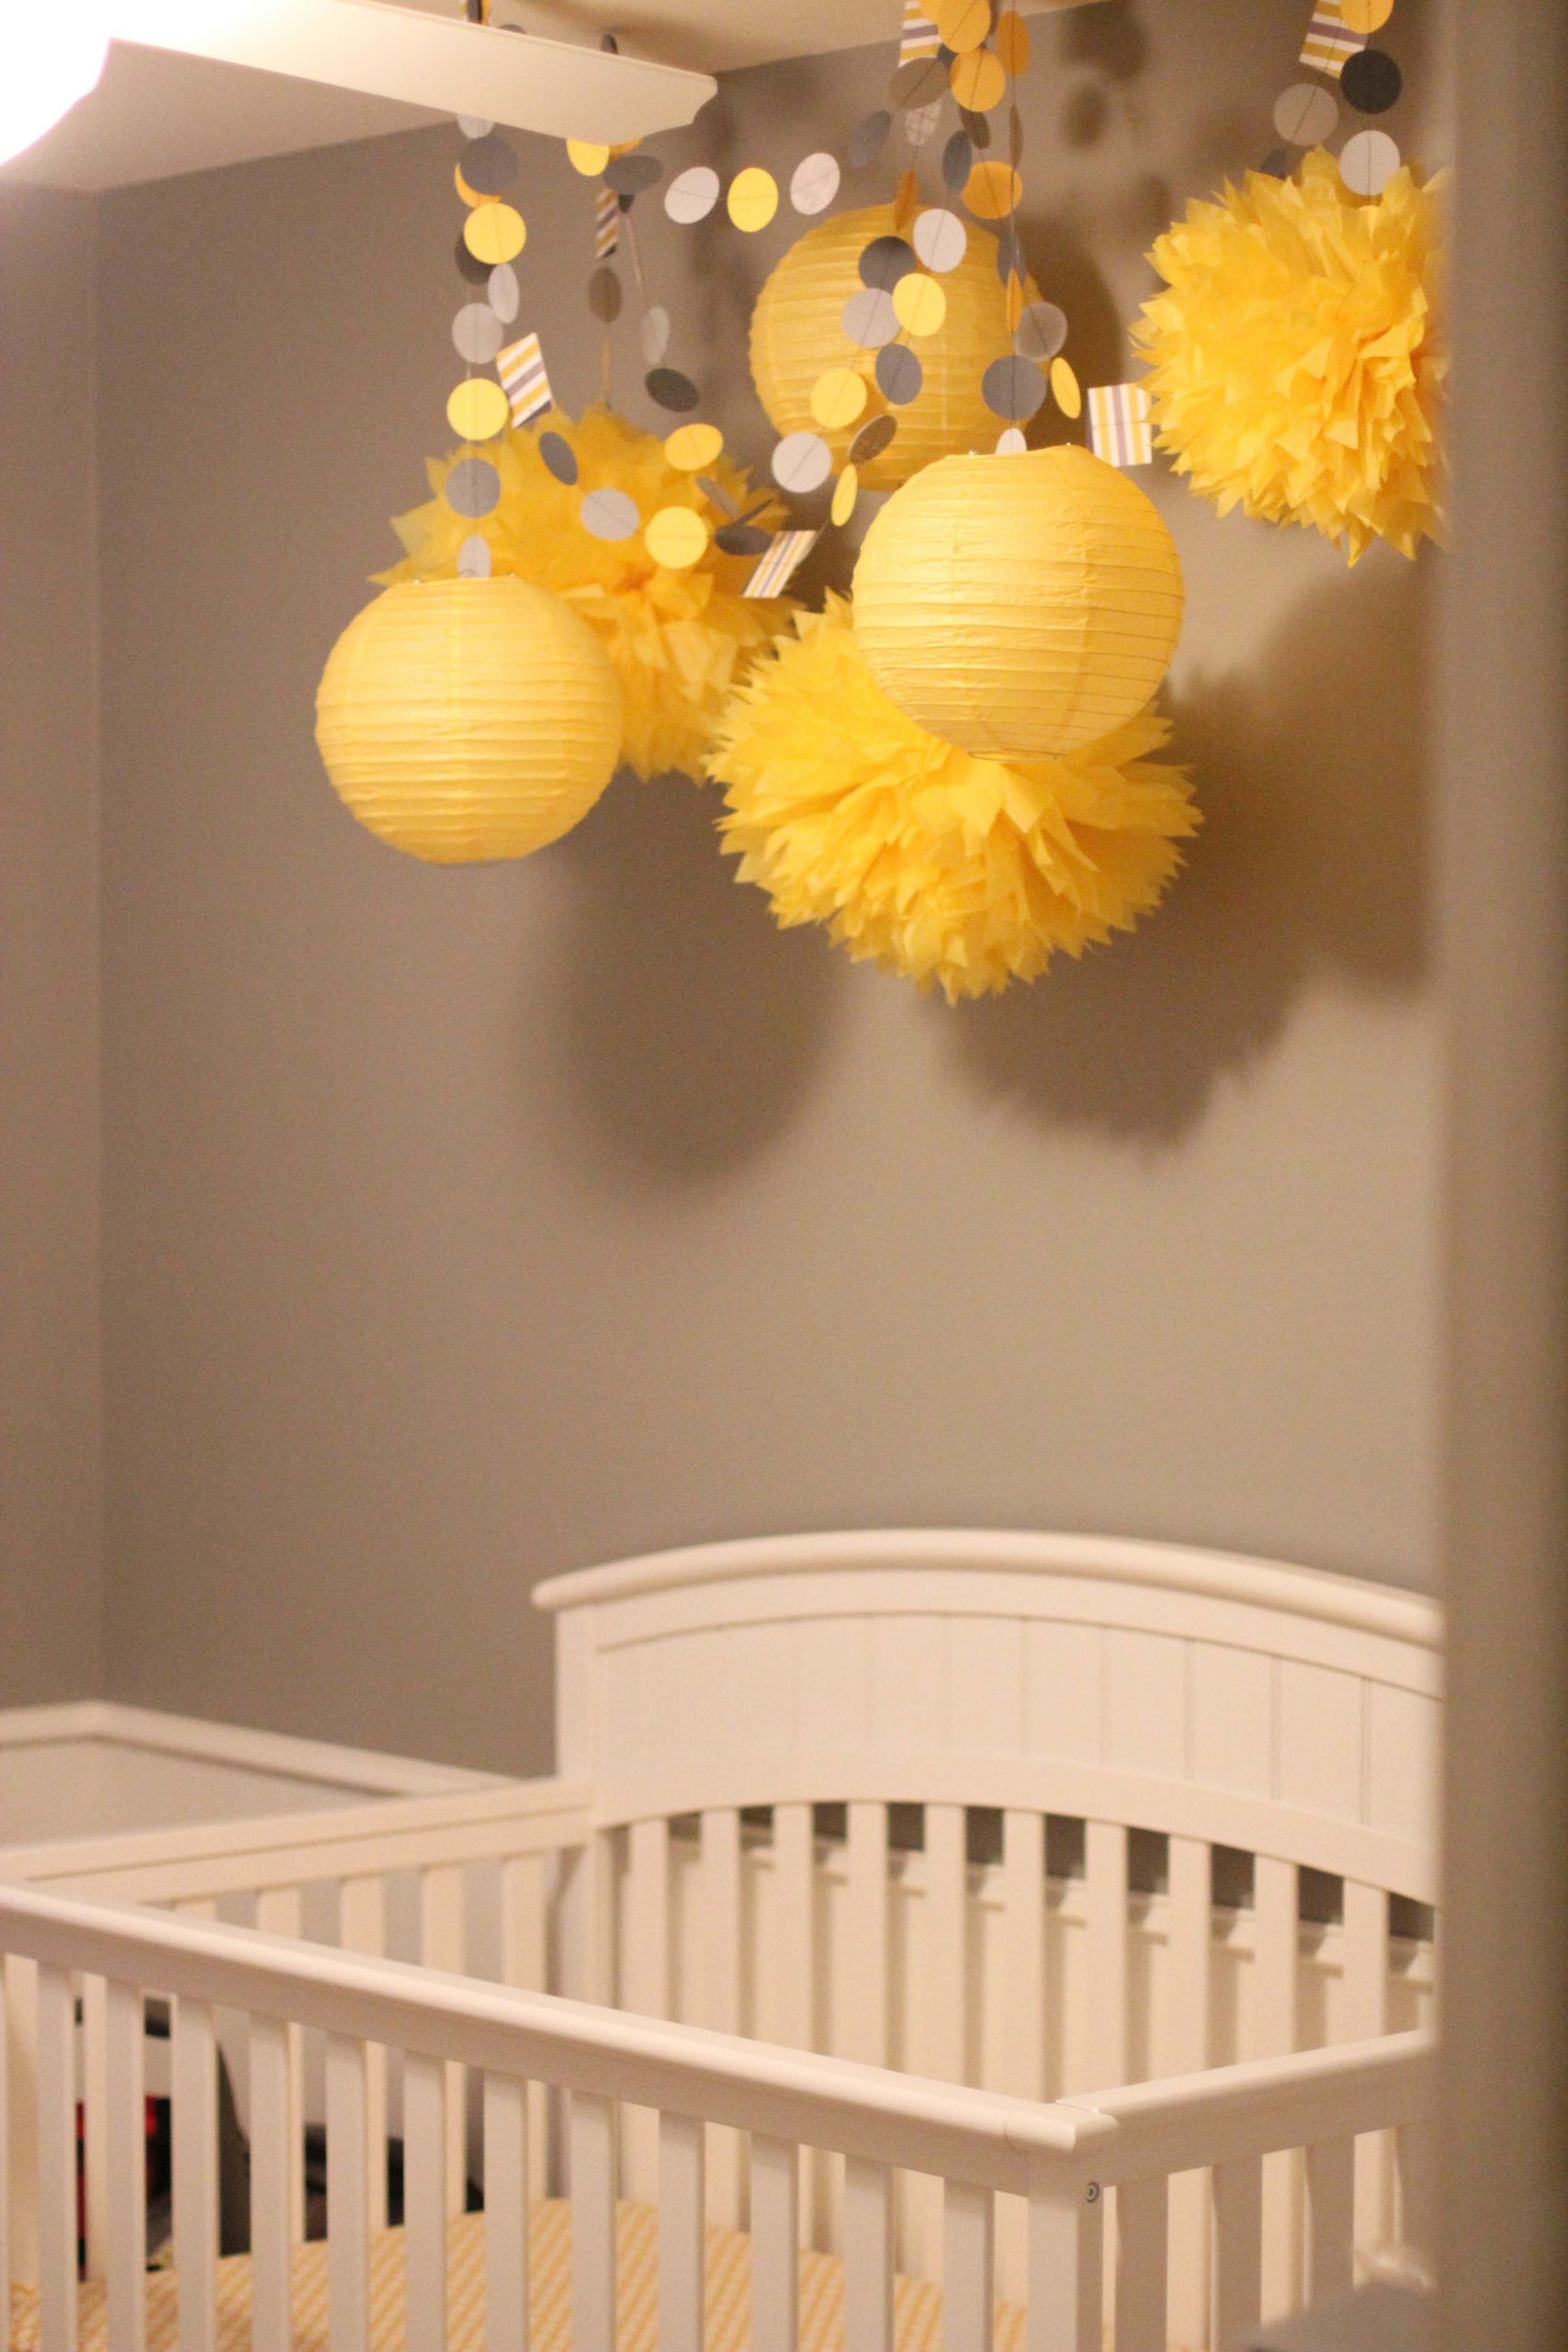 Baby Shower Room Decorations
 Yellow and Gray Baby Shower